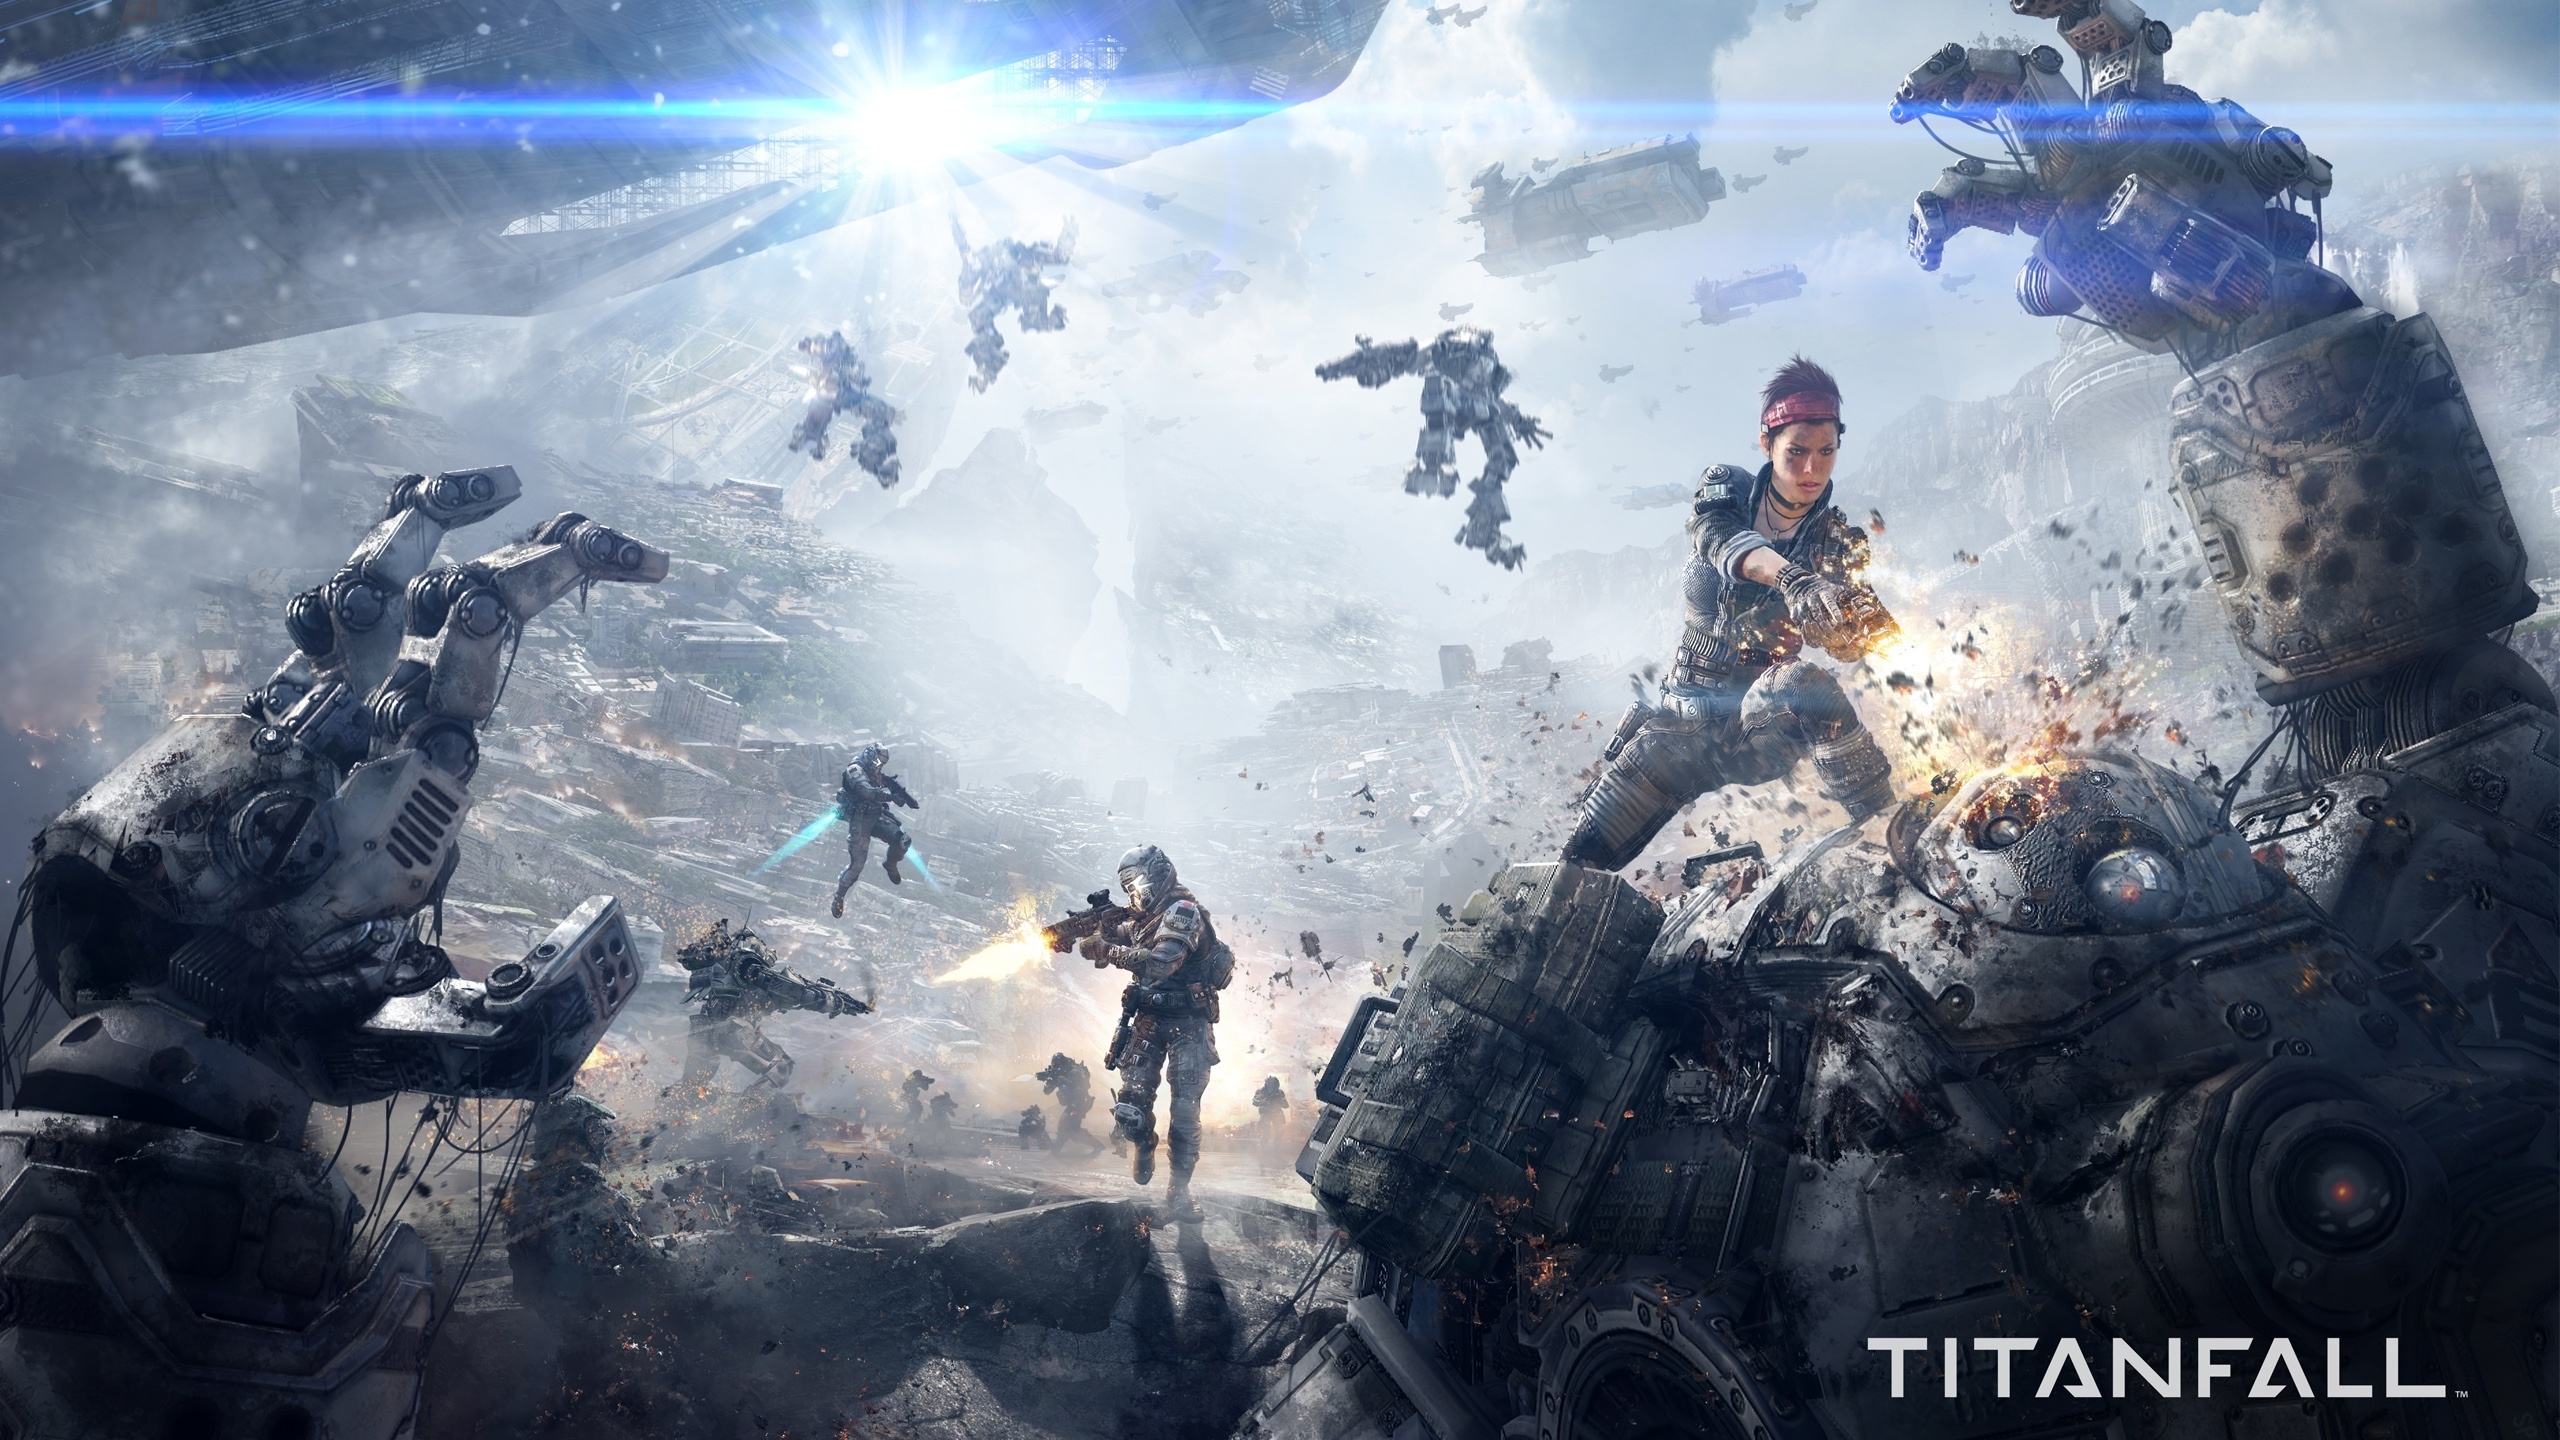 Titanfall Game for 2560x1440 HDTV resolution